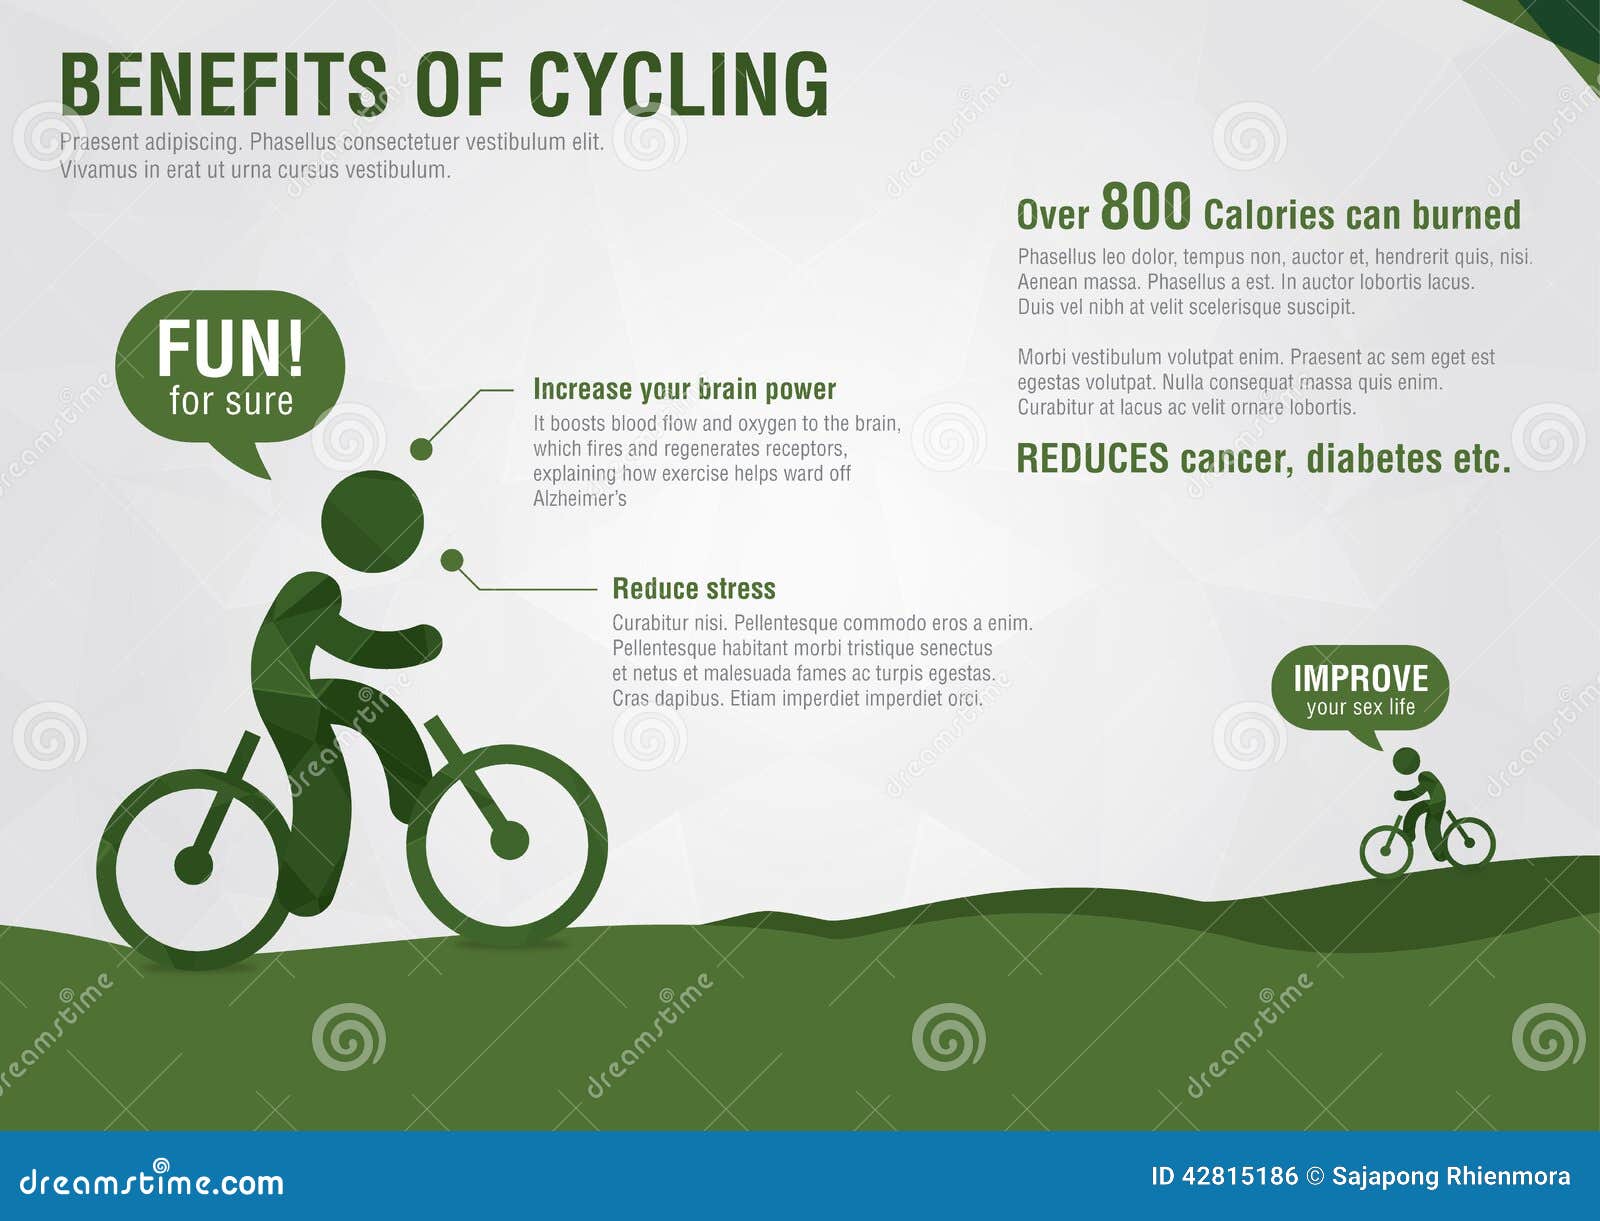 Info Graphic Benefits Of Cycling With A Pixel Diamond Texture with The Stylish  grass cycling benefits with regard to Desire